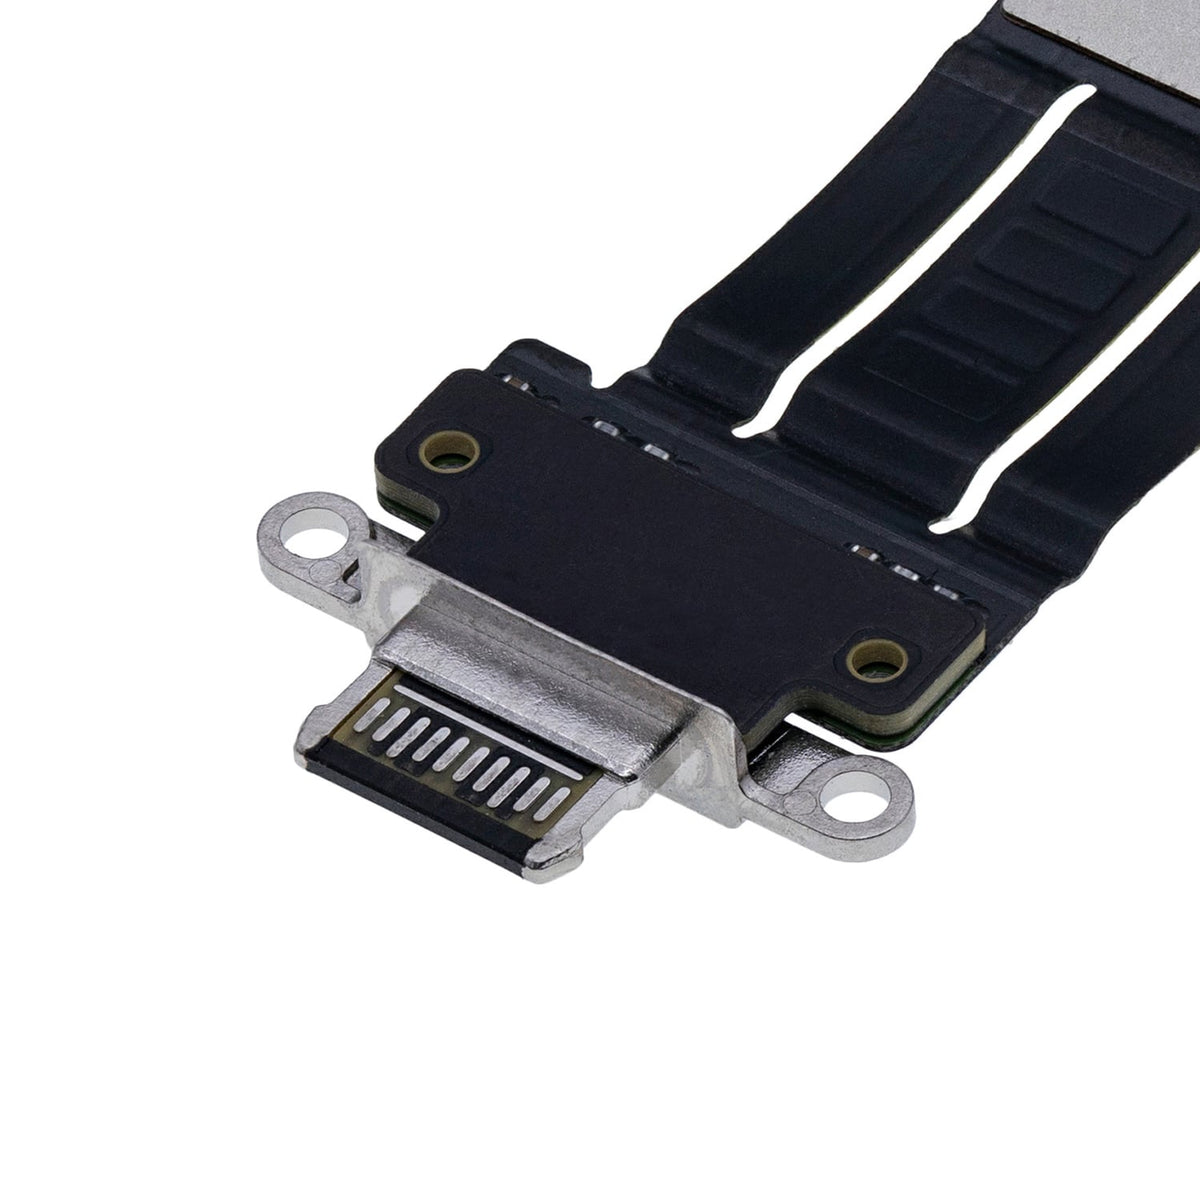 SPACE GRAY USB CHARGING CONNECTOR FLEX CABLE FOR IPAD PRO 11 3RD/12.9 5TH